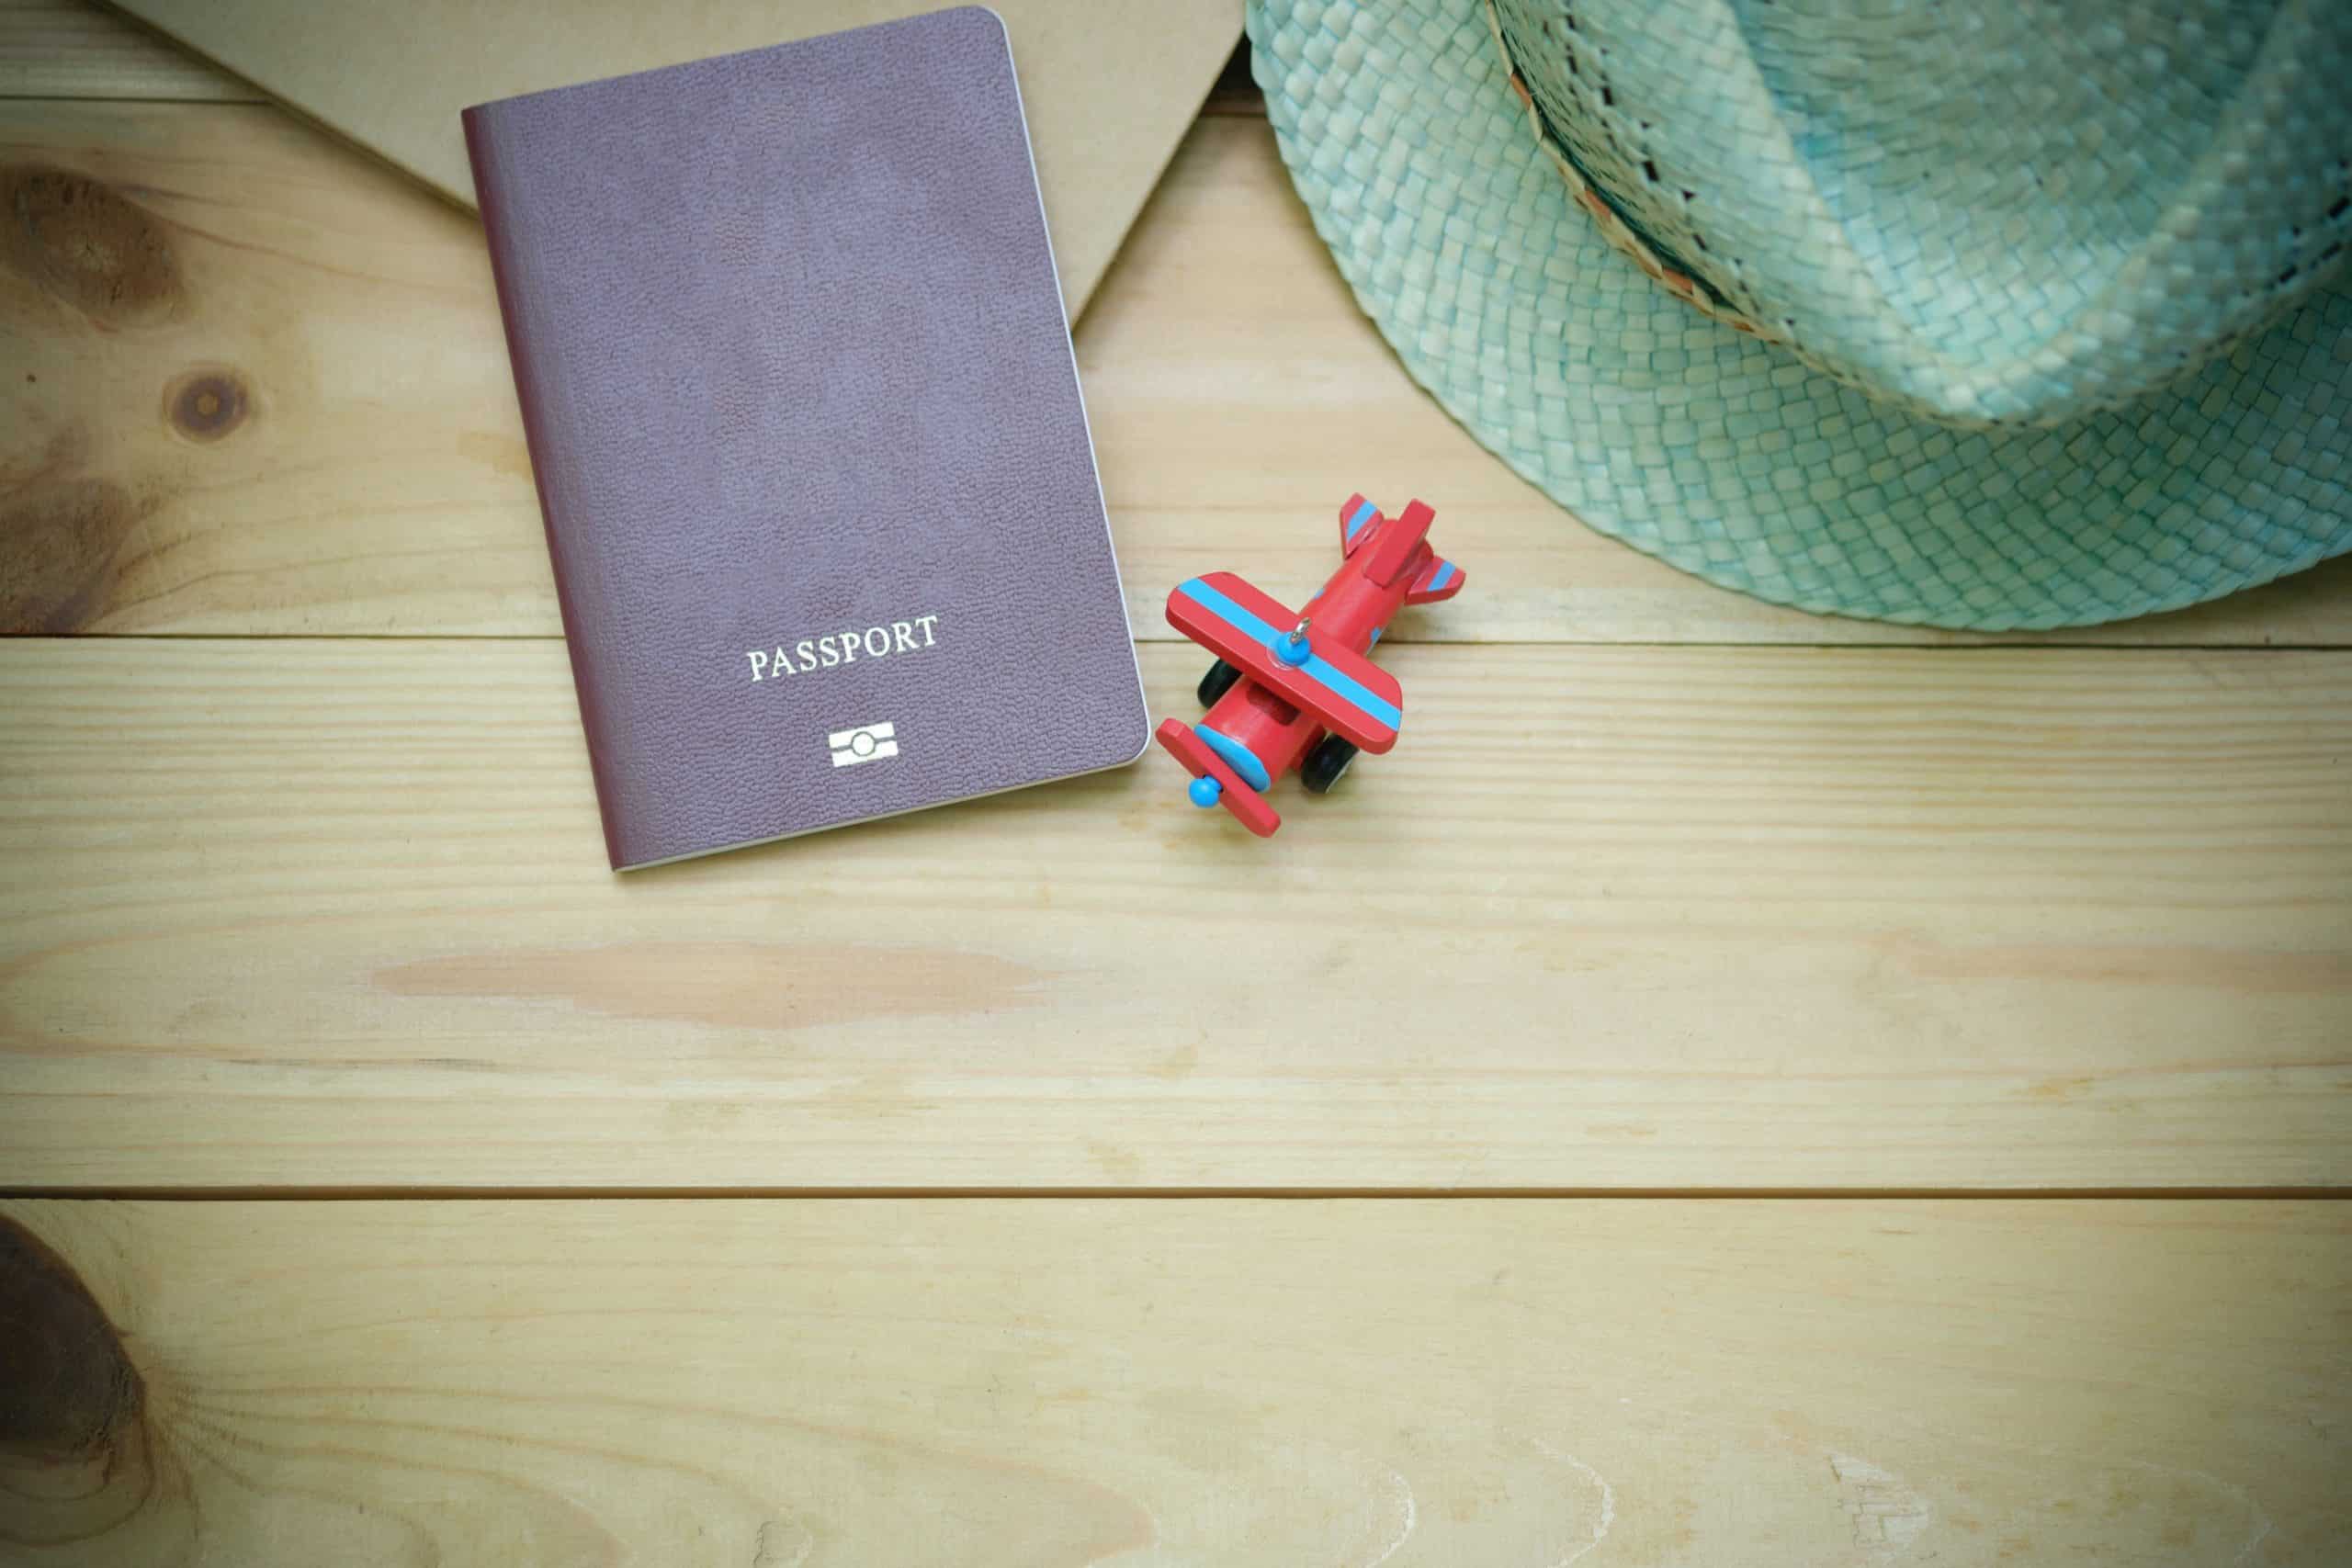 Tabletop with passport, hat, and miniature plane